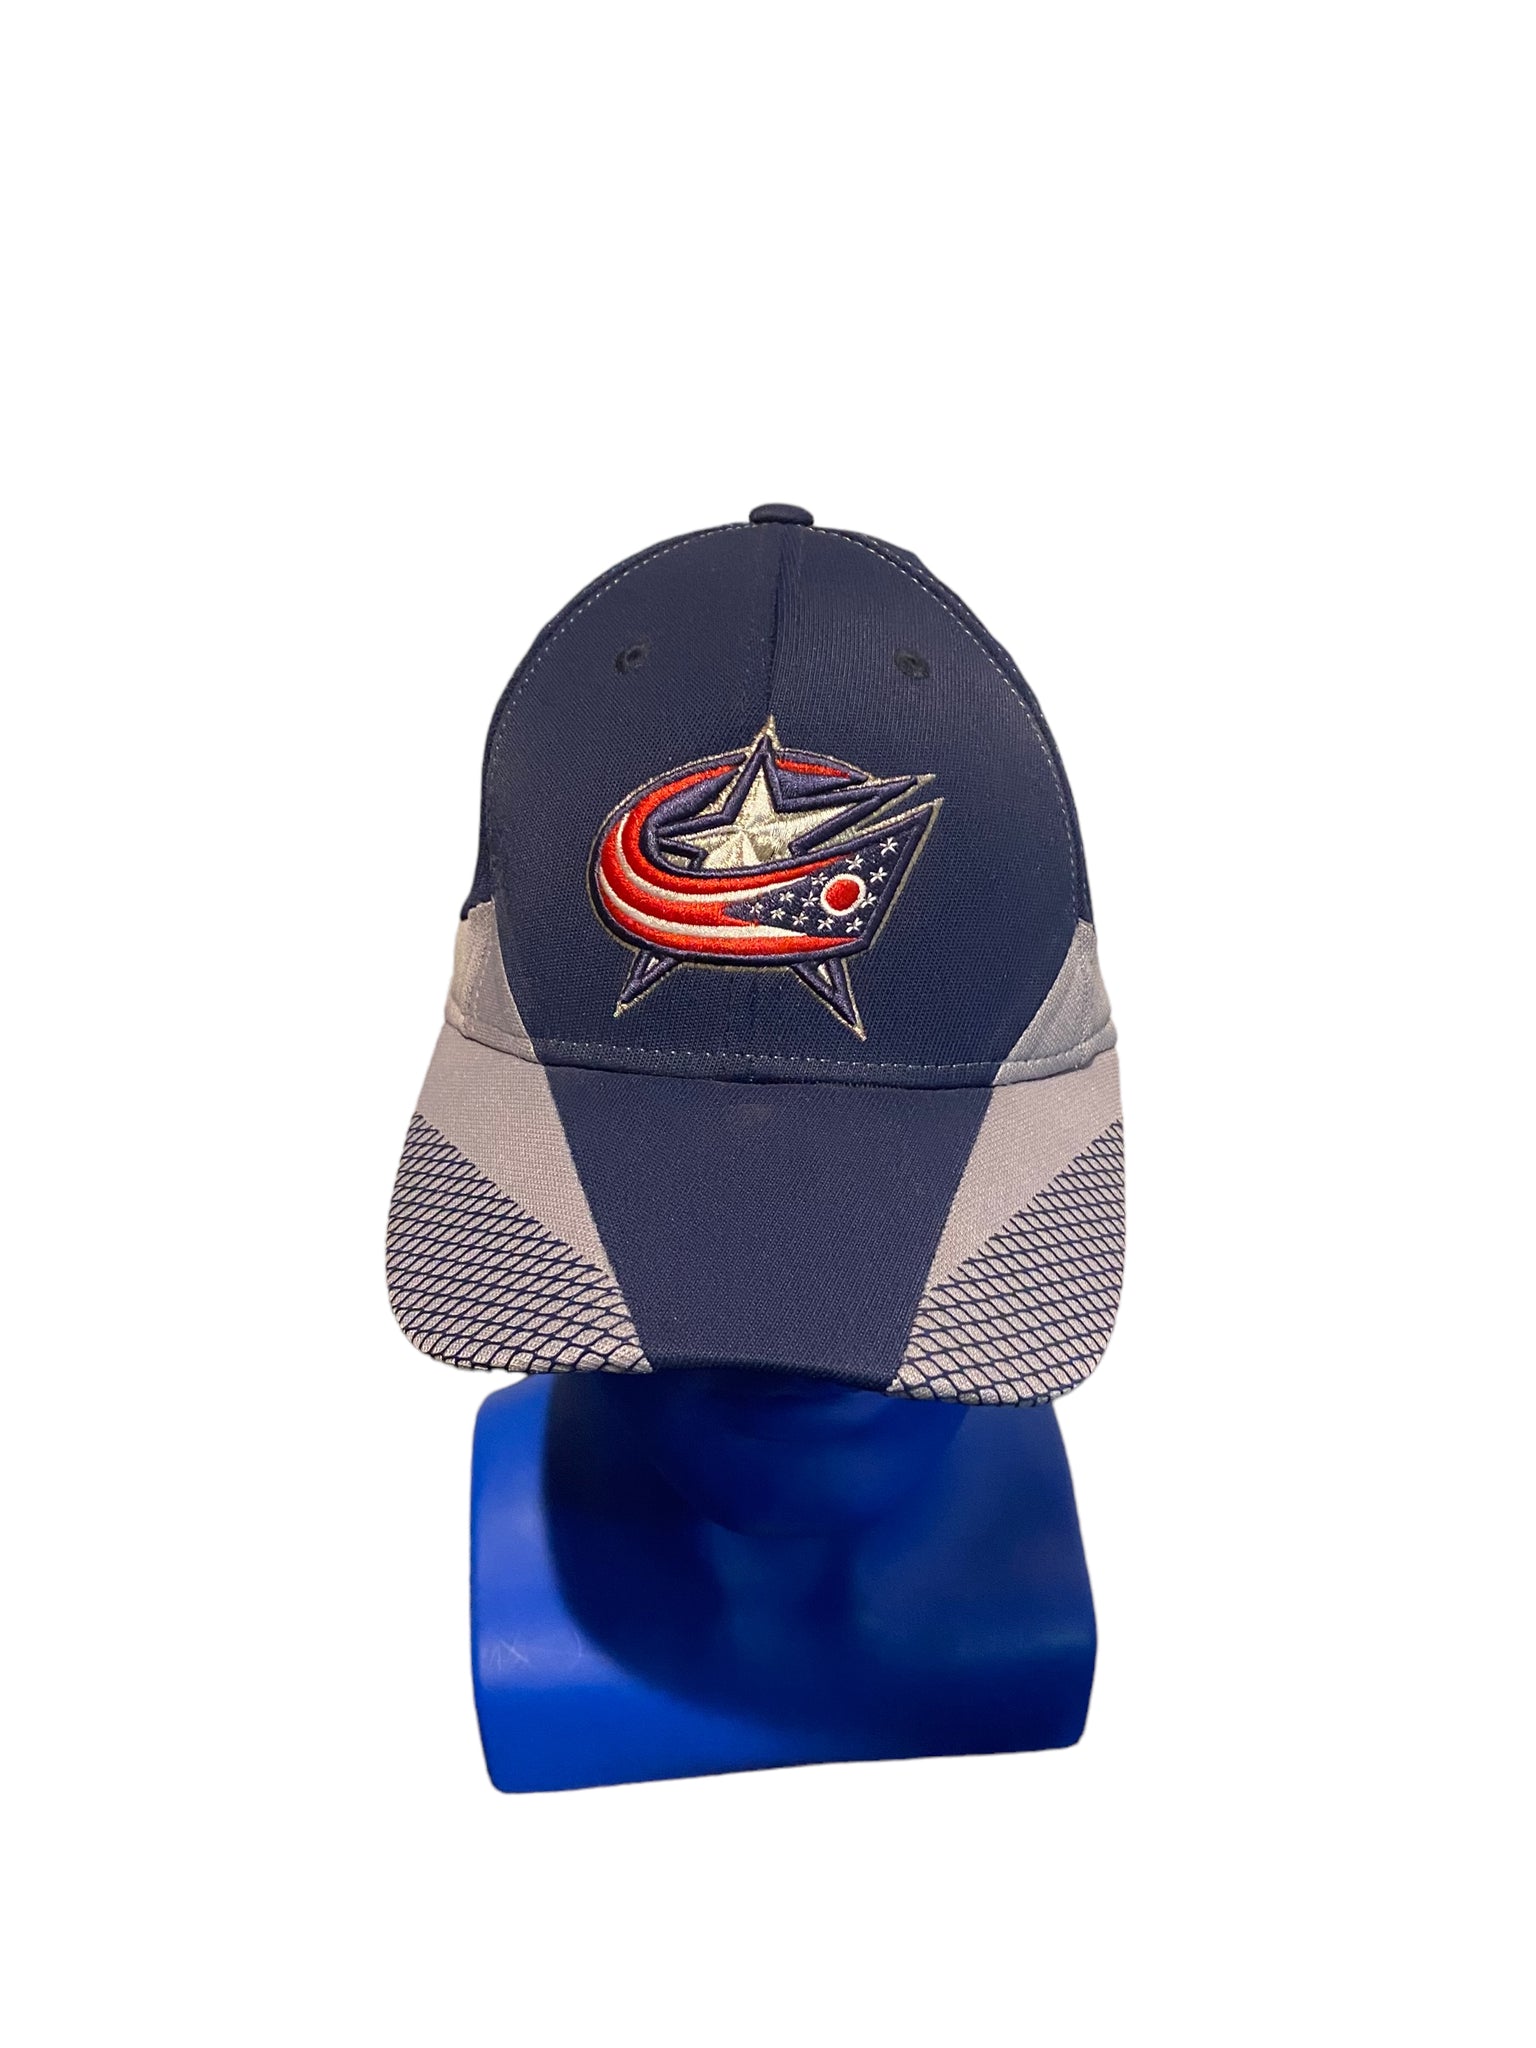 NHL columbus blue jackets reebok hat Fitted size L/xl dark blue and gray